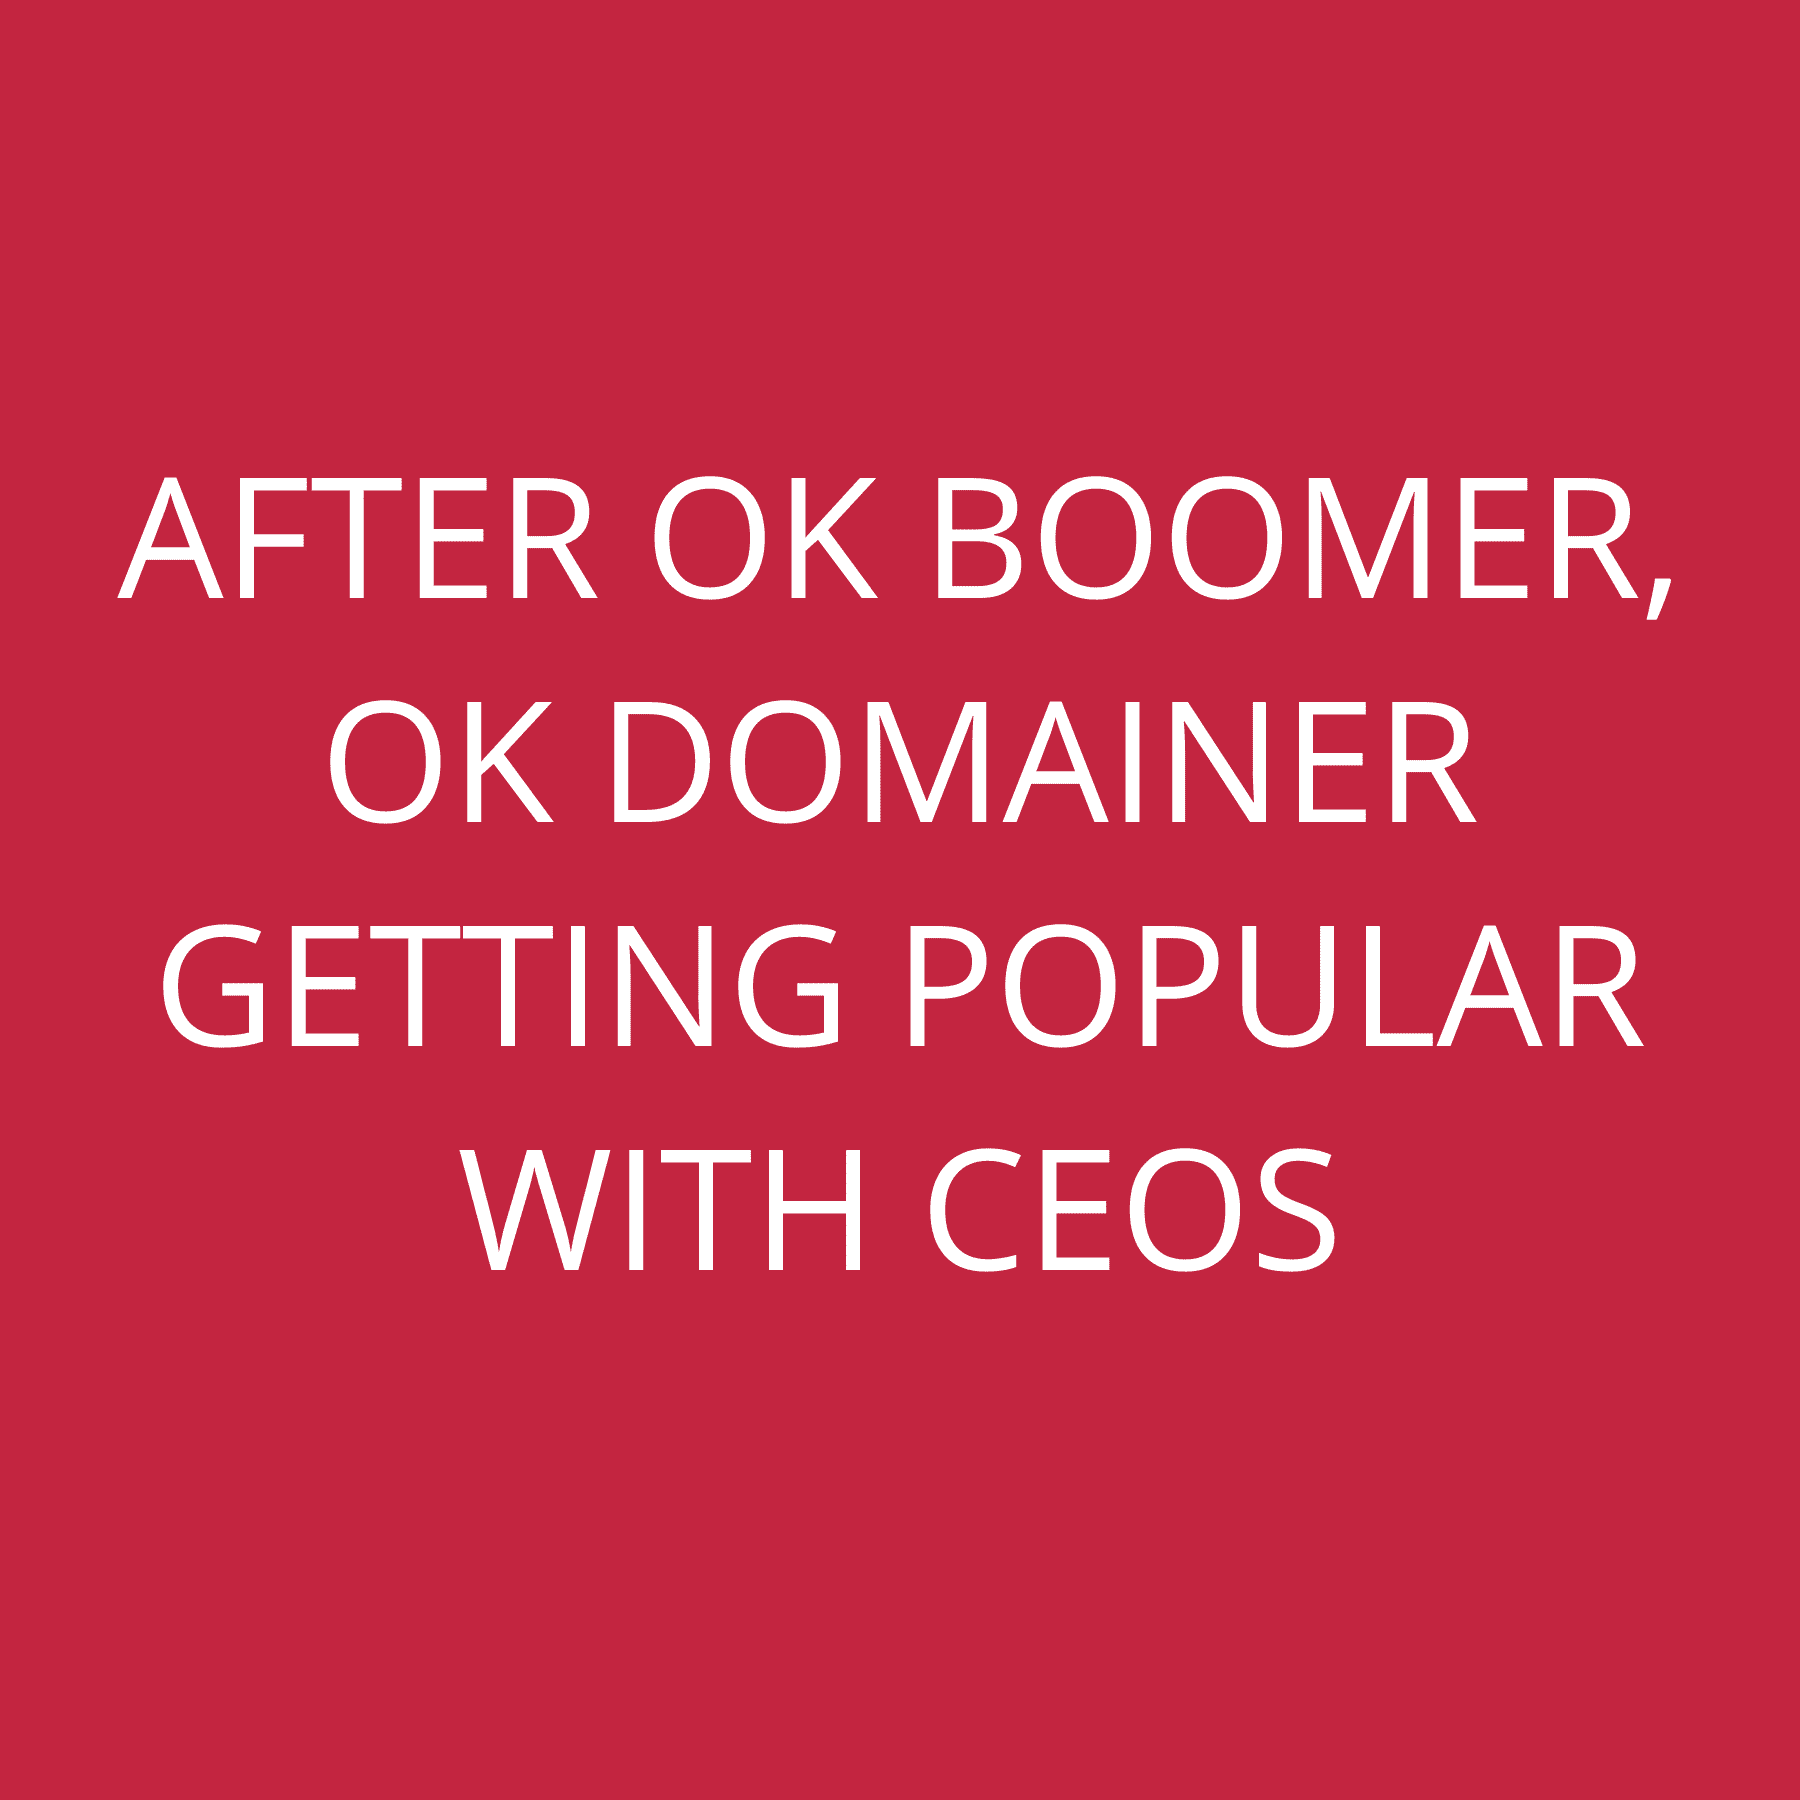 After Ok Boomer, Ok Domainer getting popular with CEOs